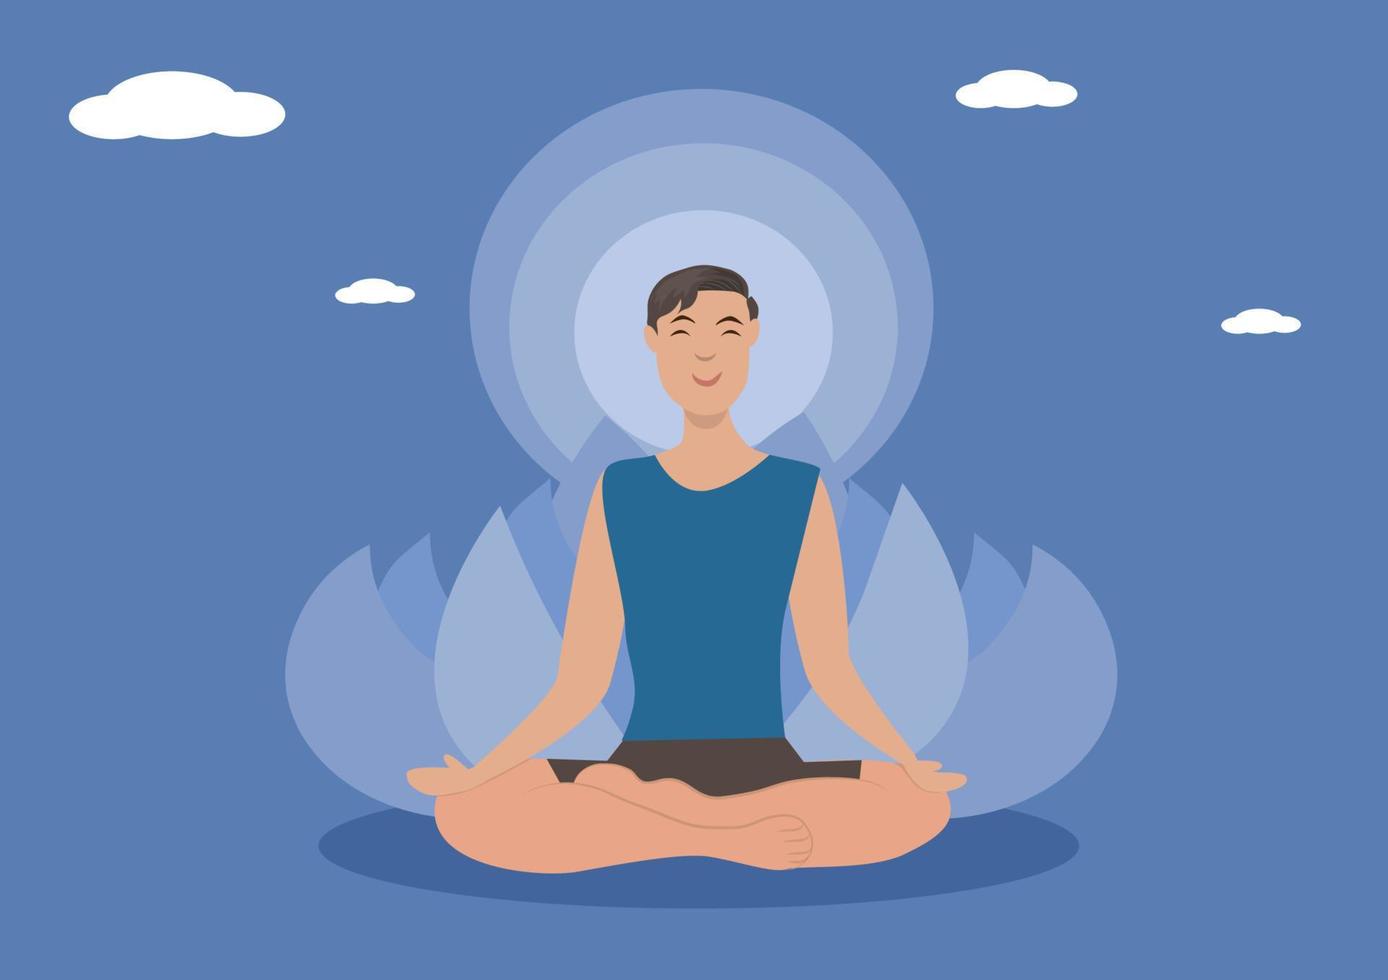 The calm male characters get from meditating. to bring peace and wisdom, vector illustration